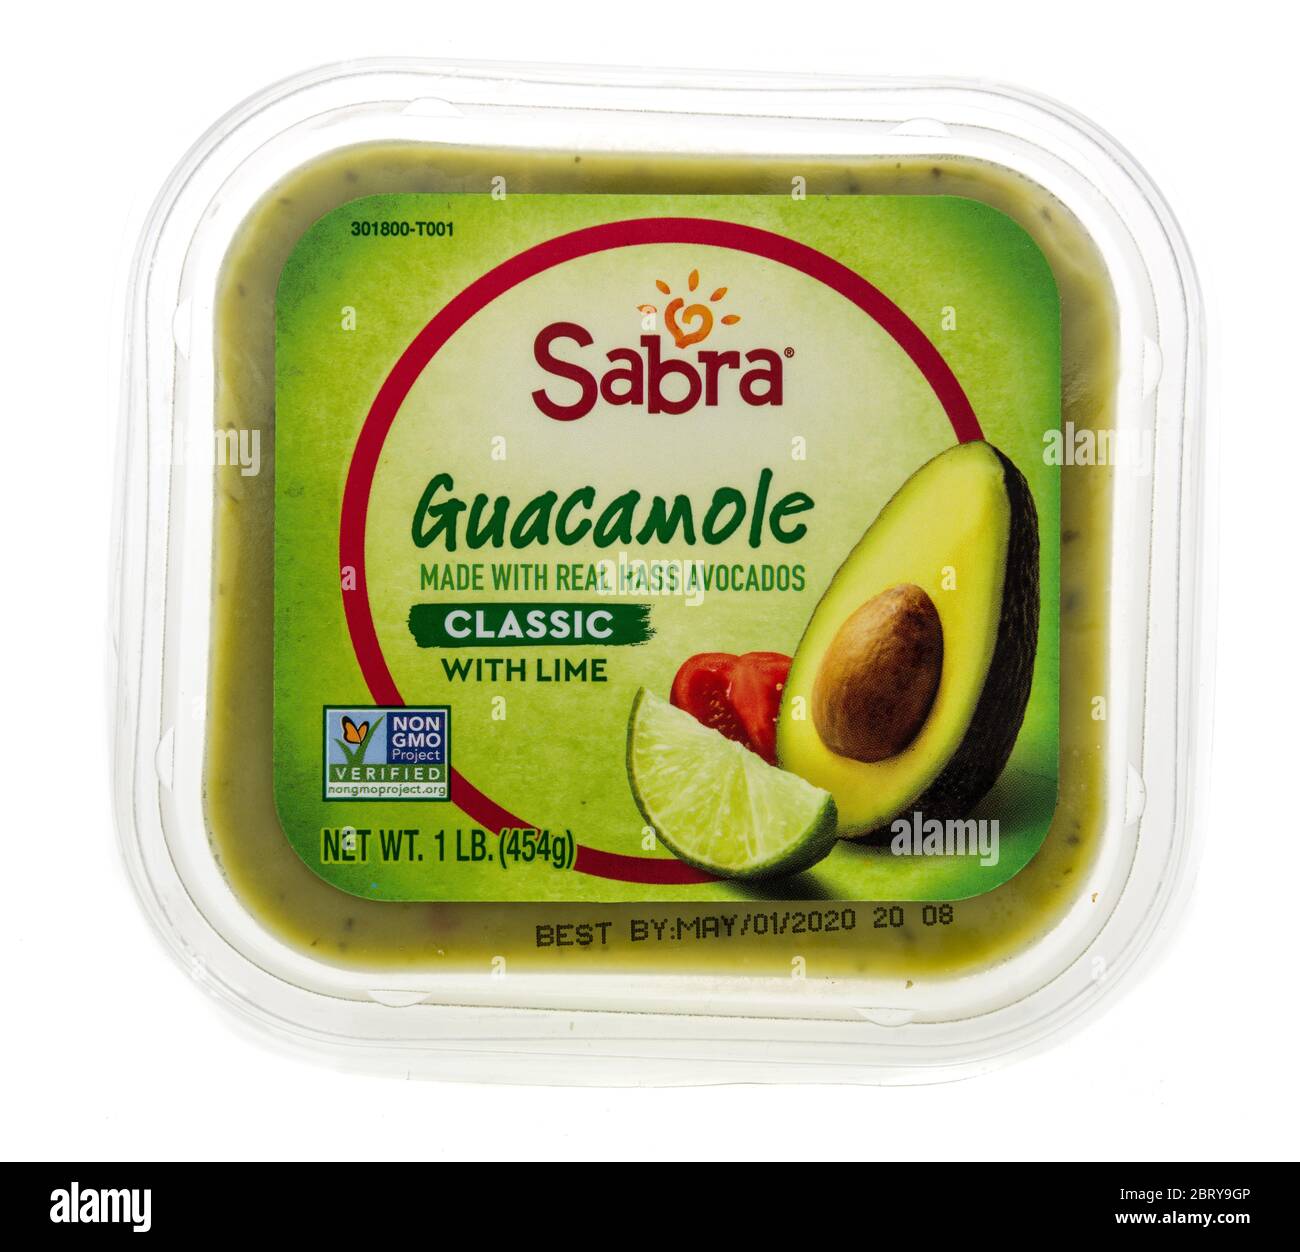 Winneconne,  WI - 15 May 2020: A package of Sabra guacamole on an isolated background Stock Photo